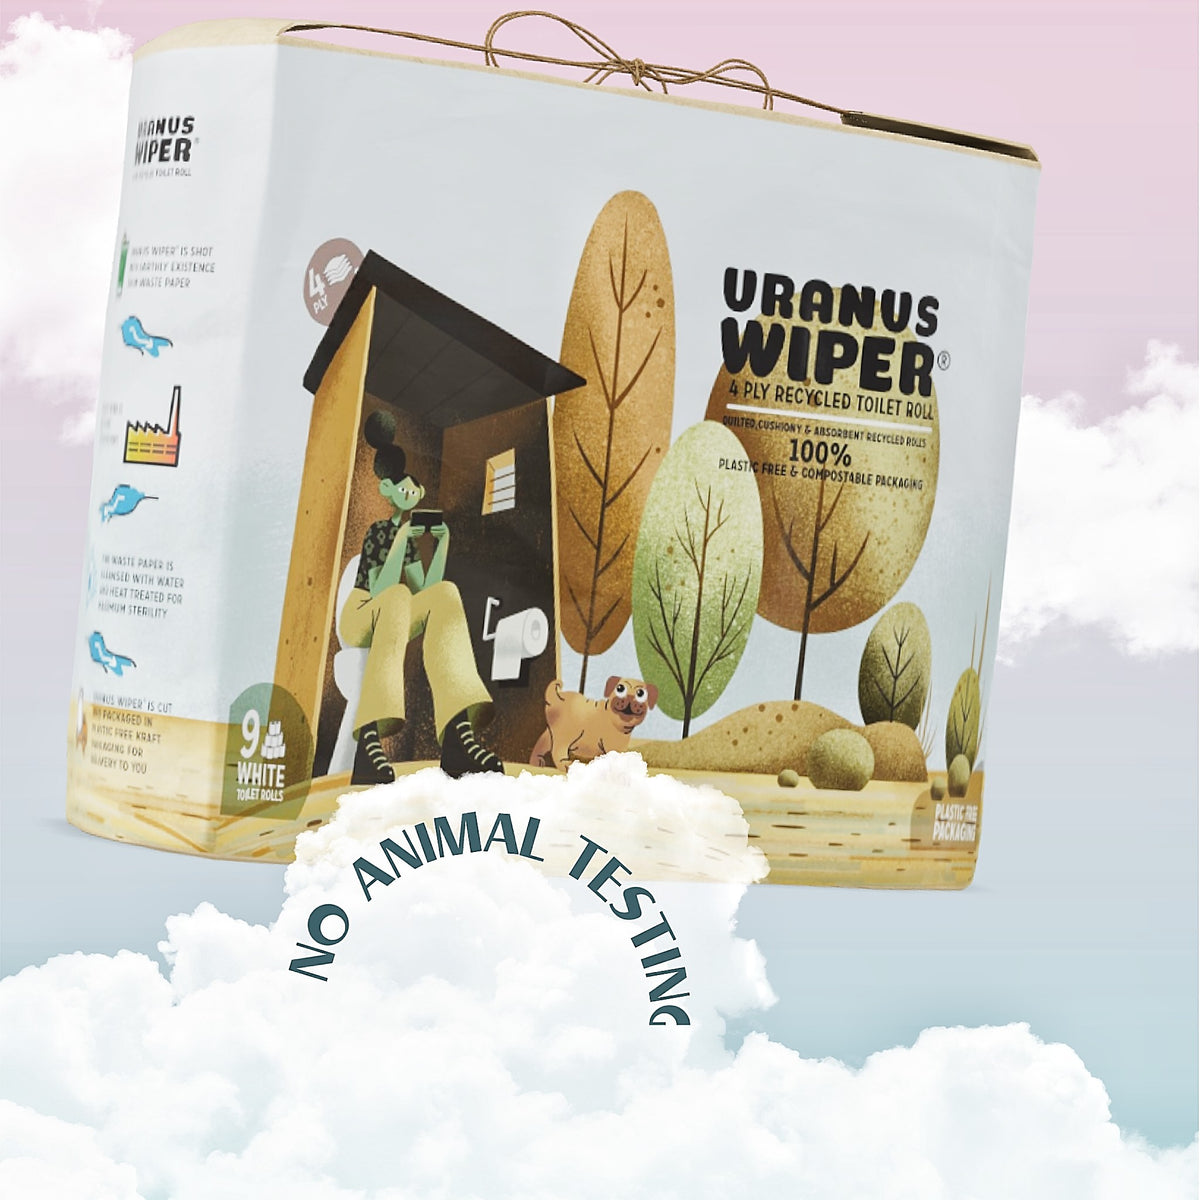 Uranus Wiper sustainable toilet roll with no plastic in the clouds